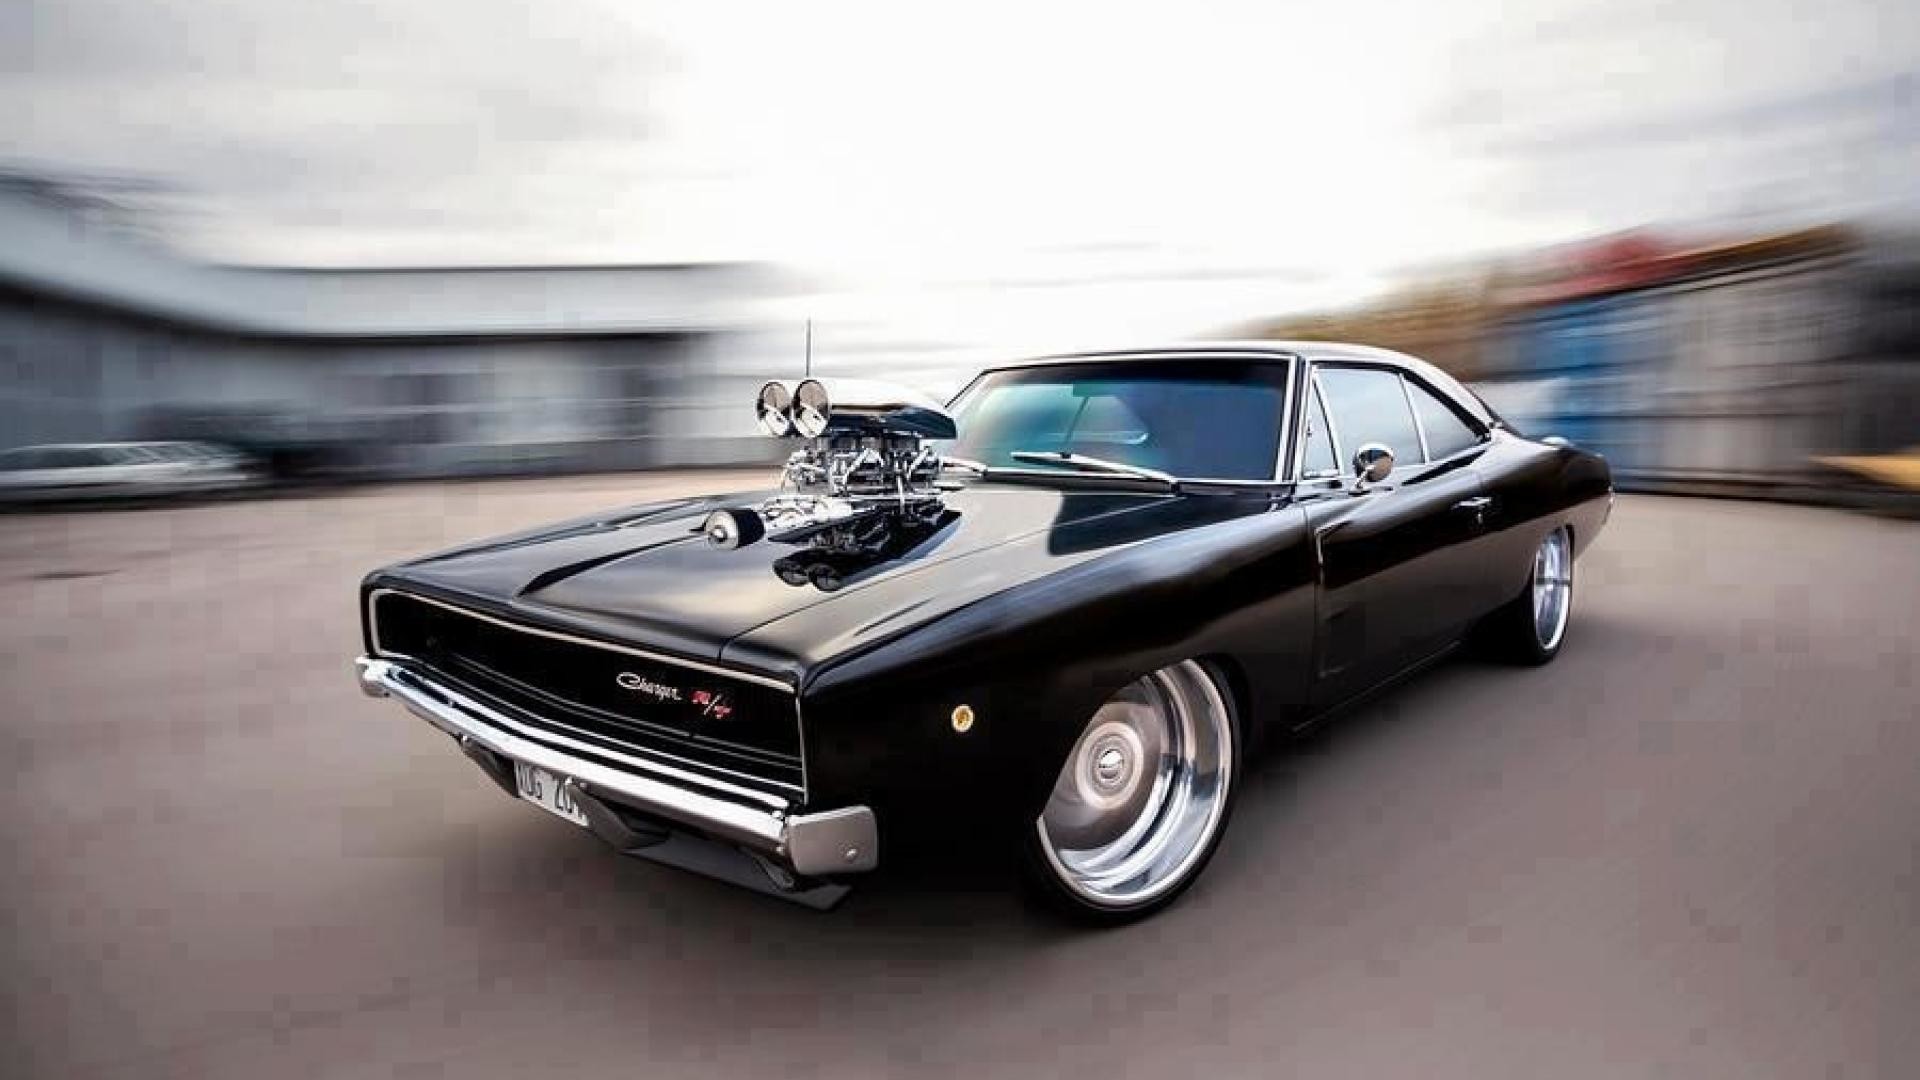 Free Download 1970 Dodge Charger Rt Wallpaper 71 Images 1920x1080